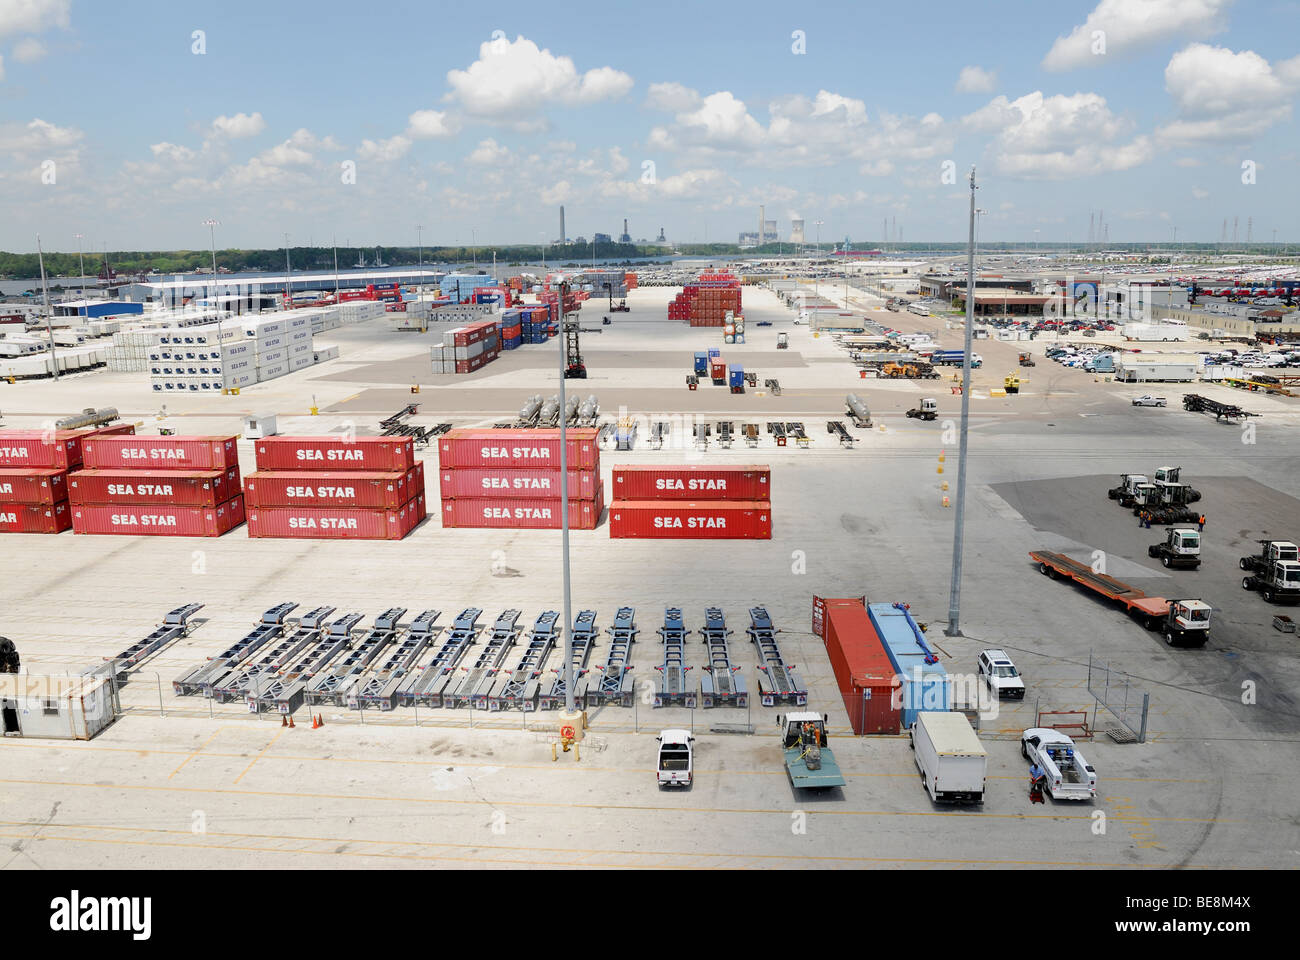 Containers lined up  at Jacksonville, Florida seaport. Stock Photo